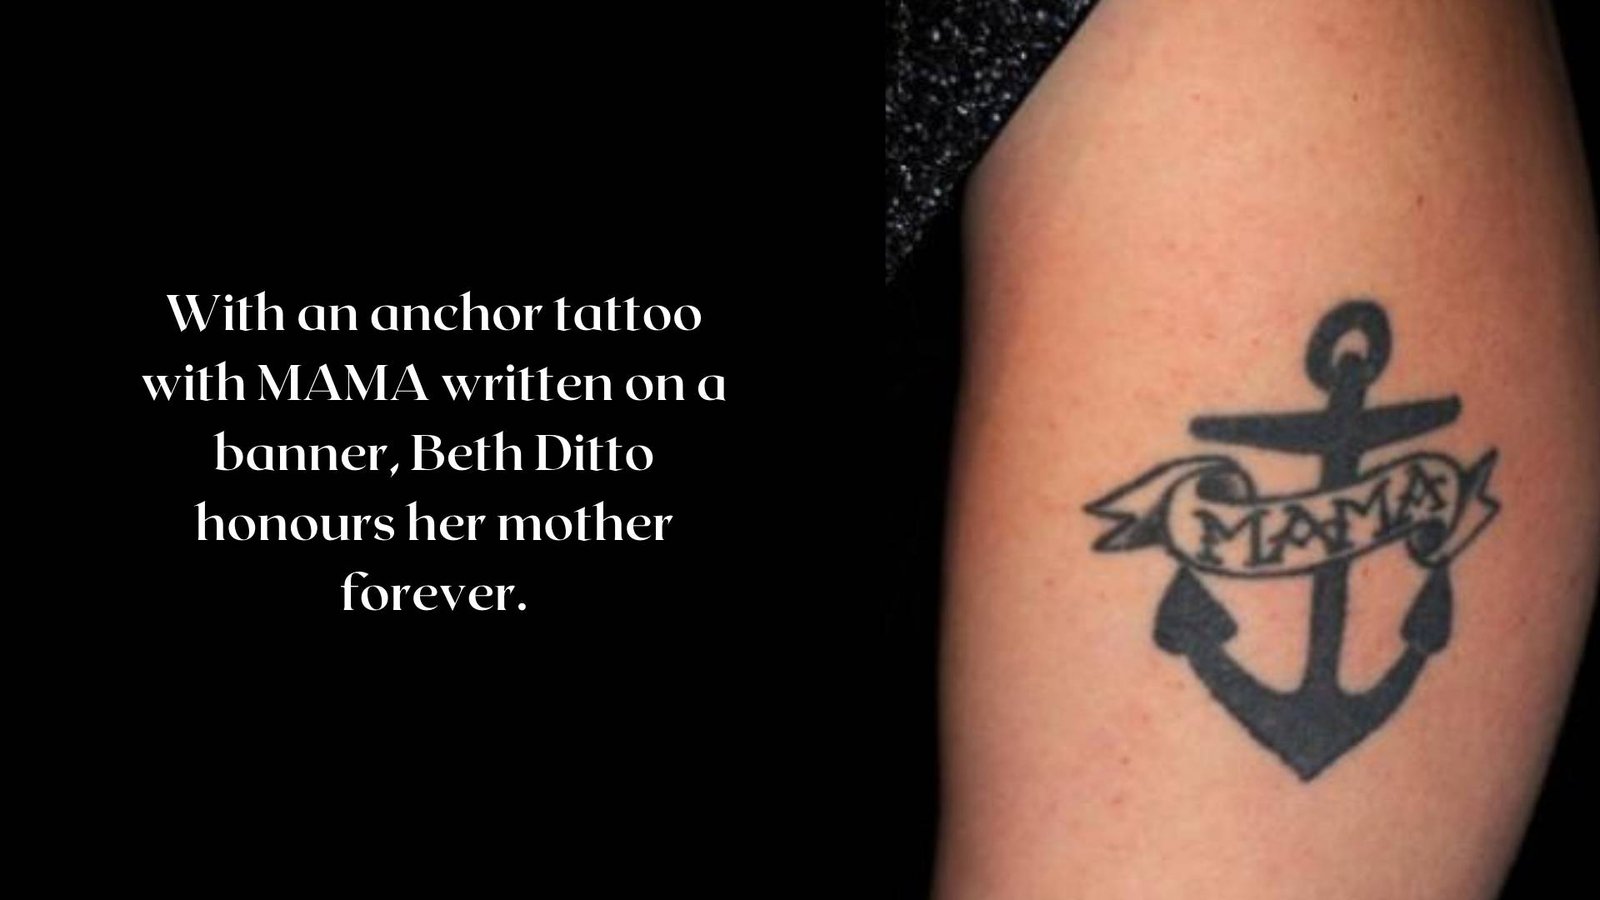 Beth Ditto’s Tattoos & Their Meanings